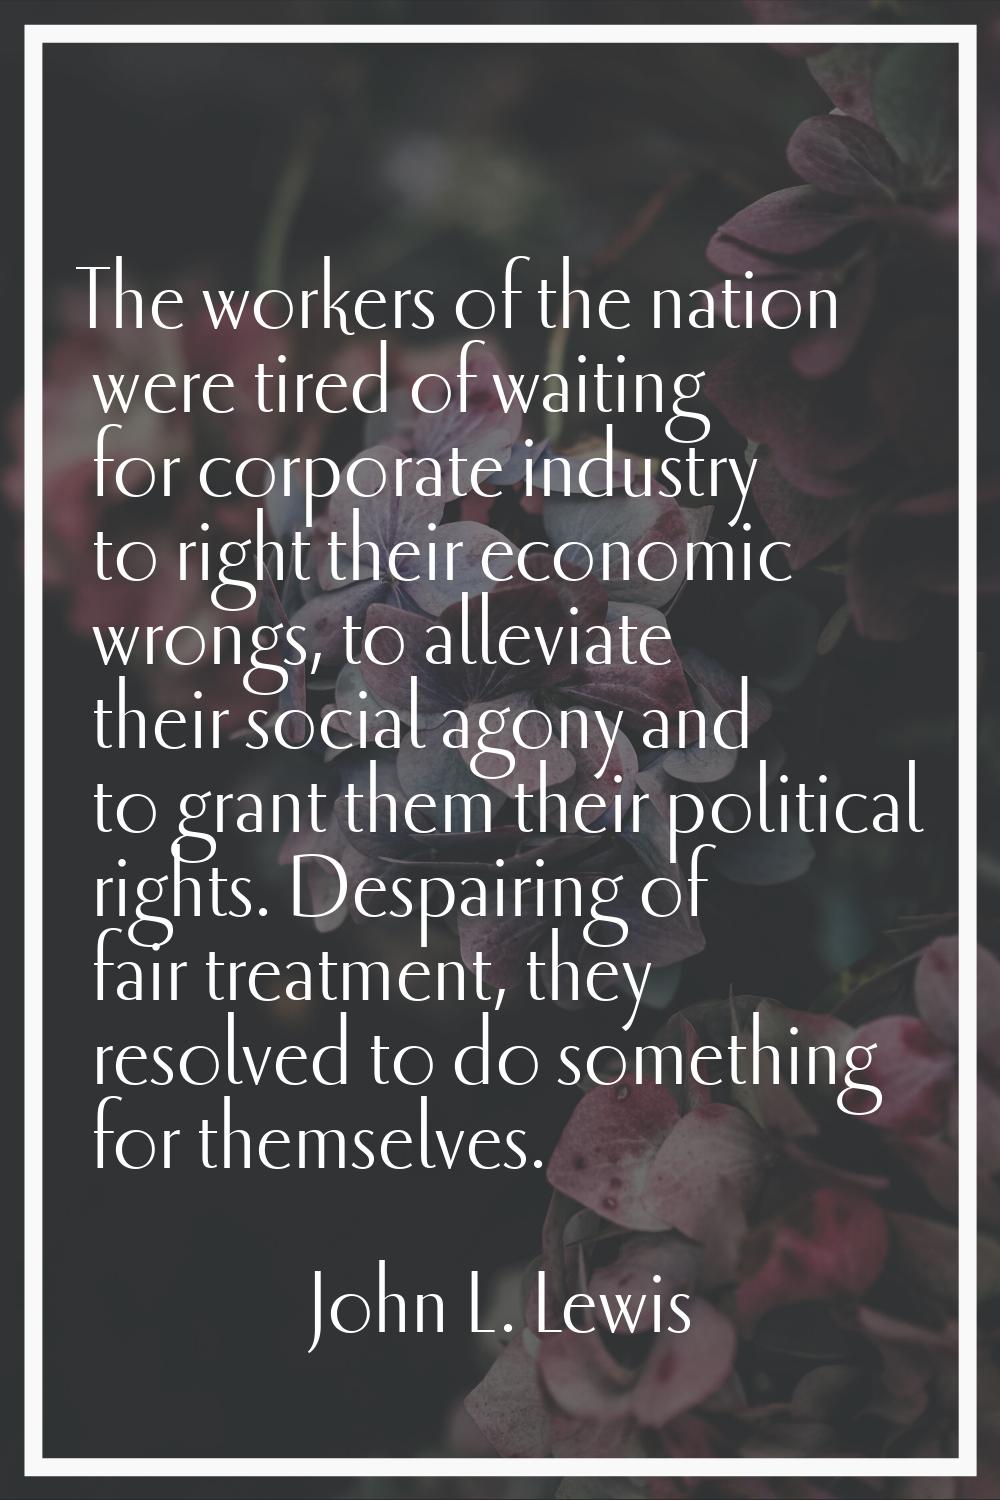 The workers of the nation were tired of waiting for corporate industry to right their economic wron